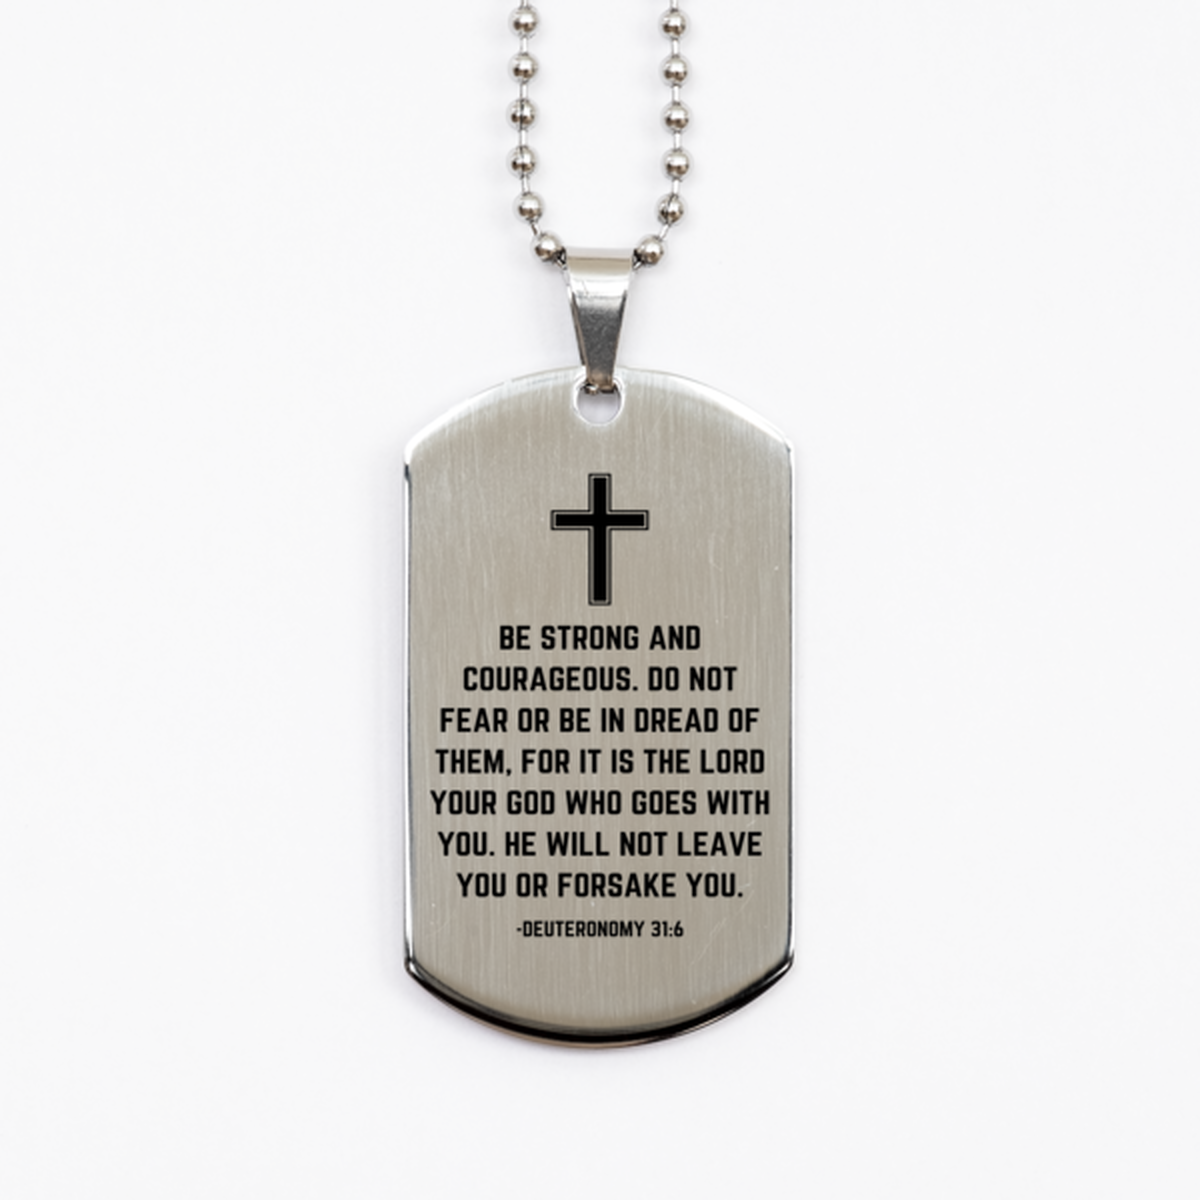 Baptism Gifts For Teenage Boys Girls, Christian Bible Verse Silver Dog Tag, Be strong and courageous, Confirmation Gifts, Bible Verse Necklace for Son, Godson, Grandson, Nephew